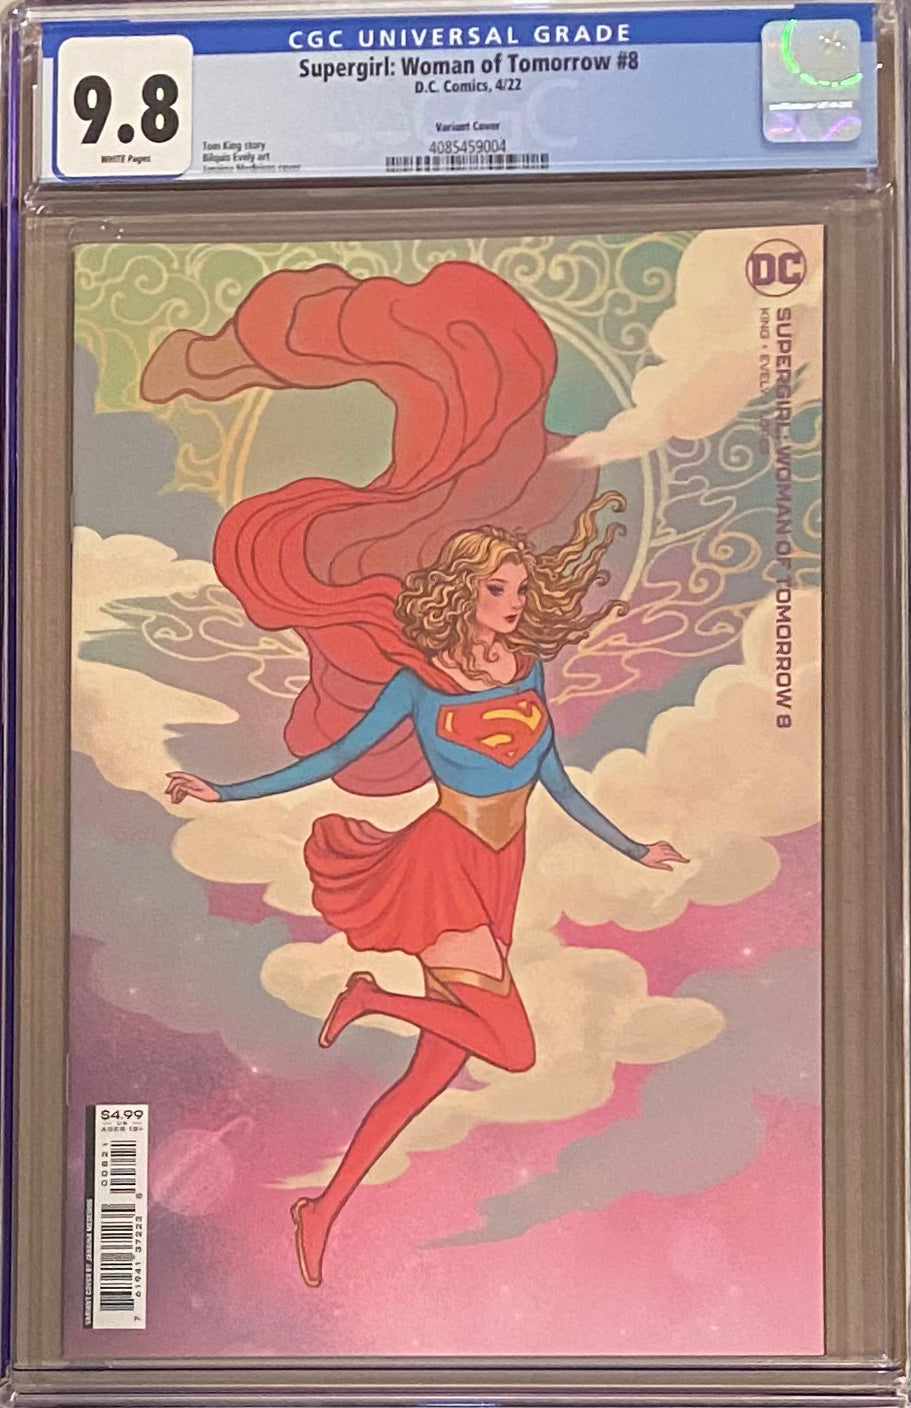 Supergirl: Woman of Tomorrow #8 Variant CGC 9.8